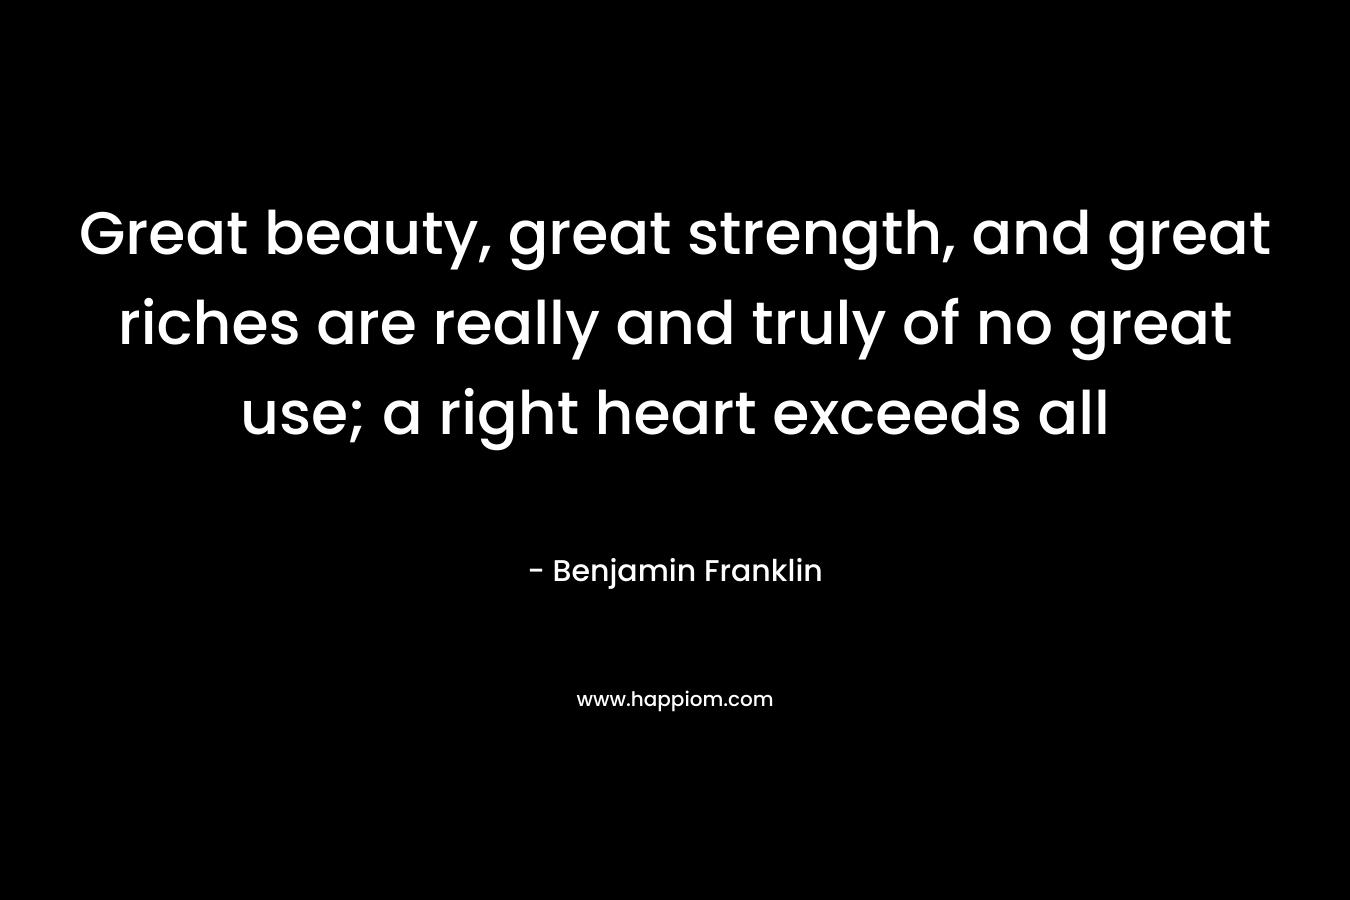 Great beauty, great strength, and great riches are really and truly of no great use; a right heart exceeds all